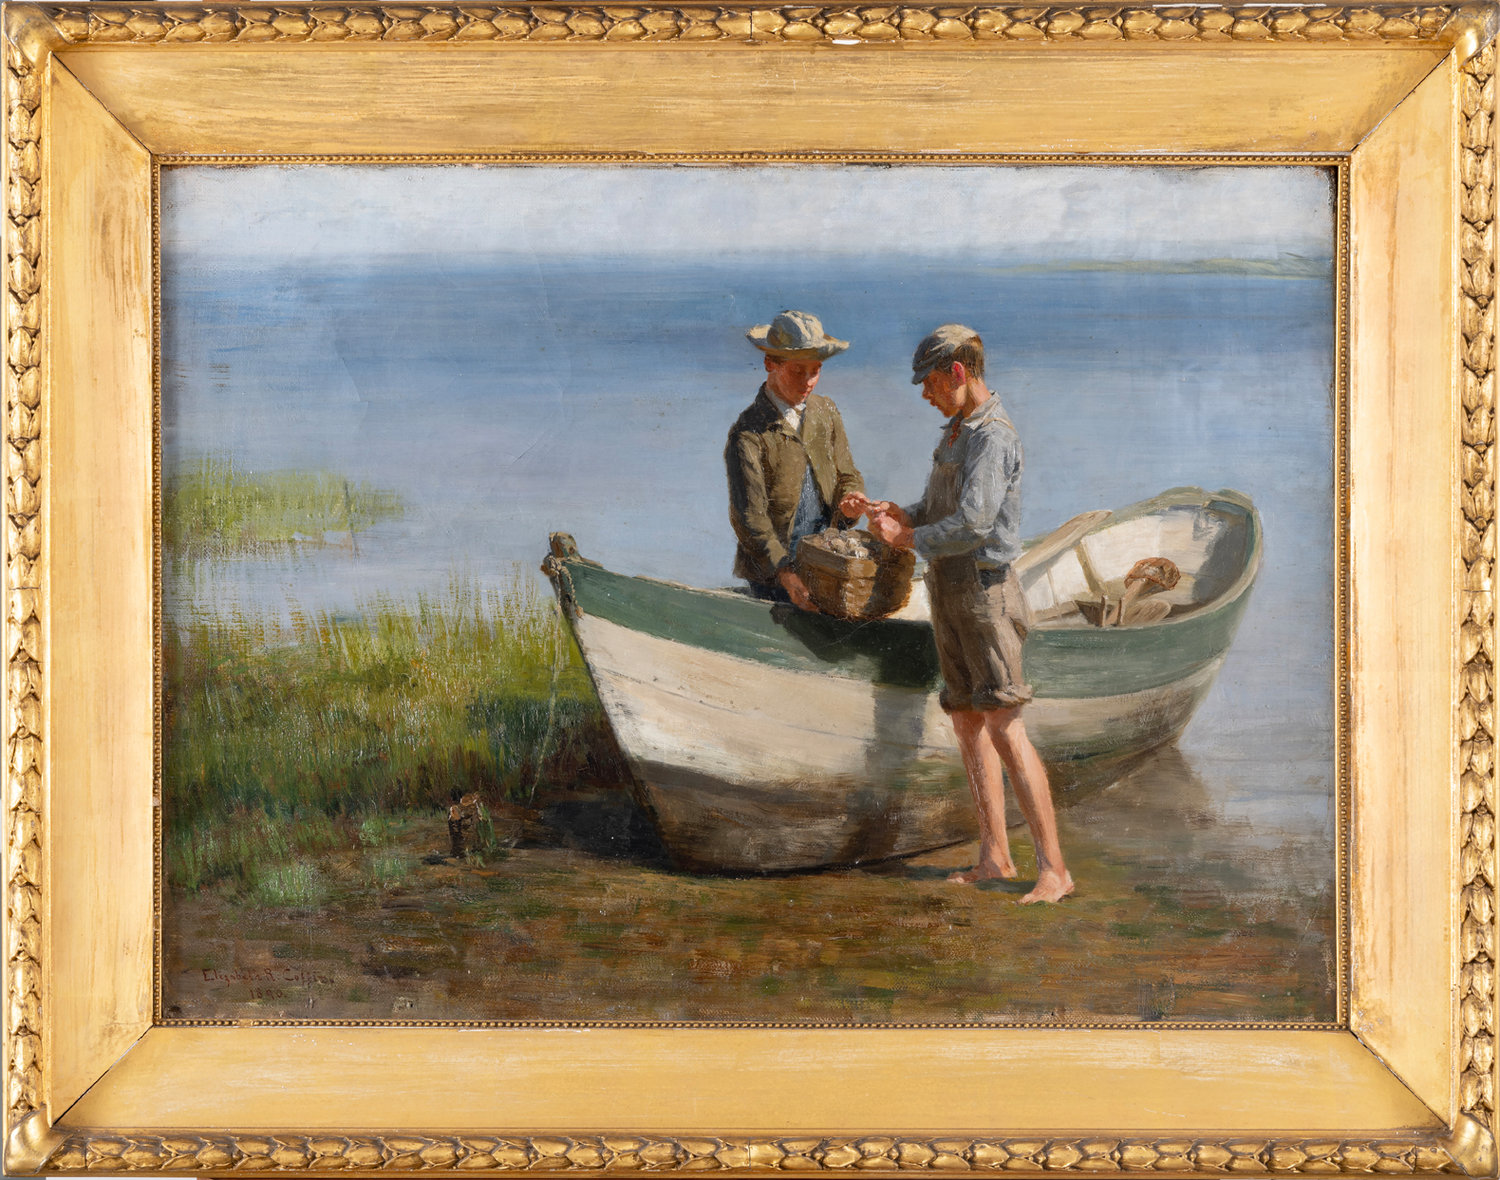 "At Eventide," painted by Elizabeth Coffin in 1890.